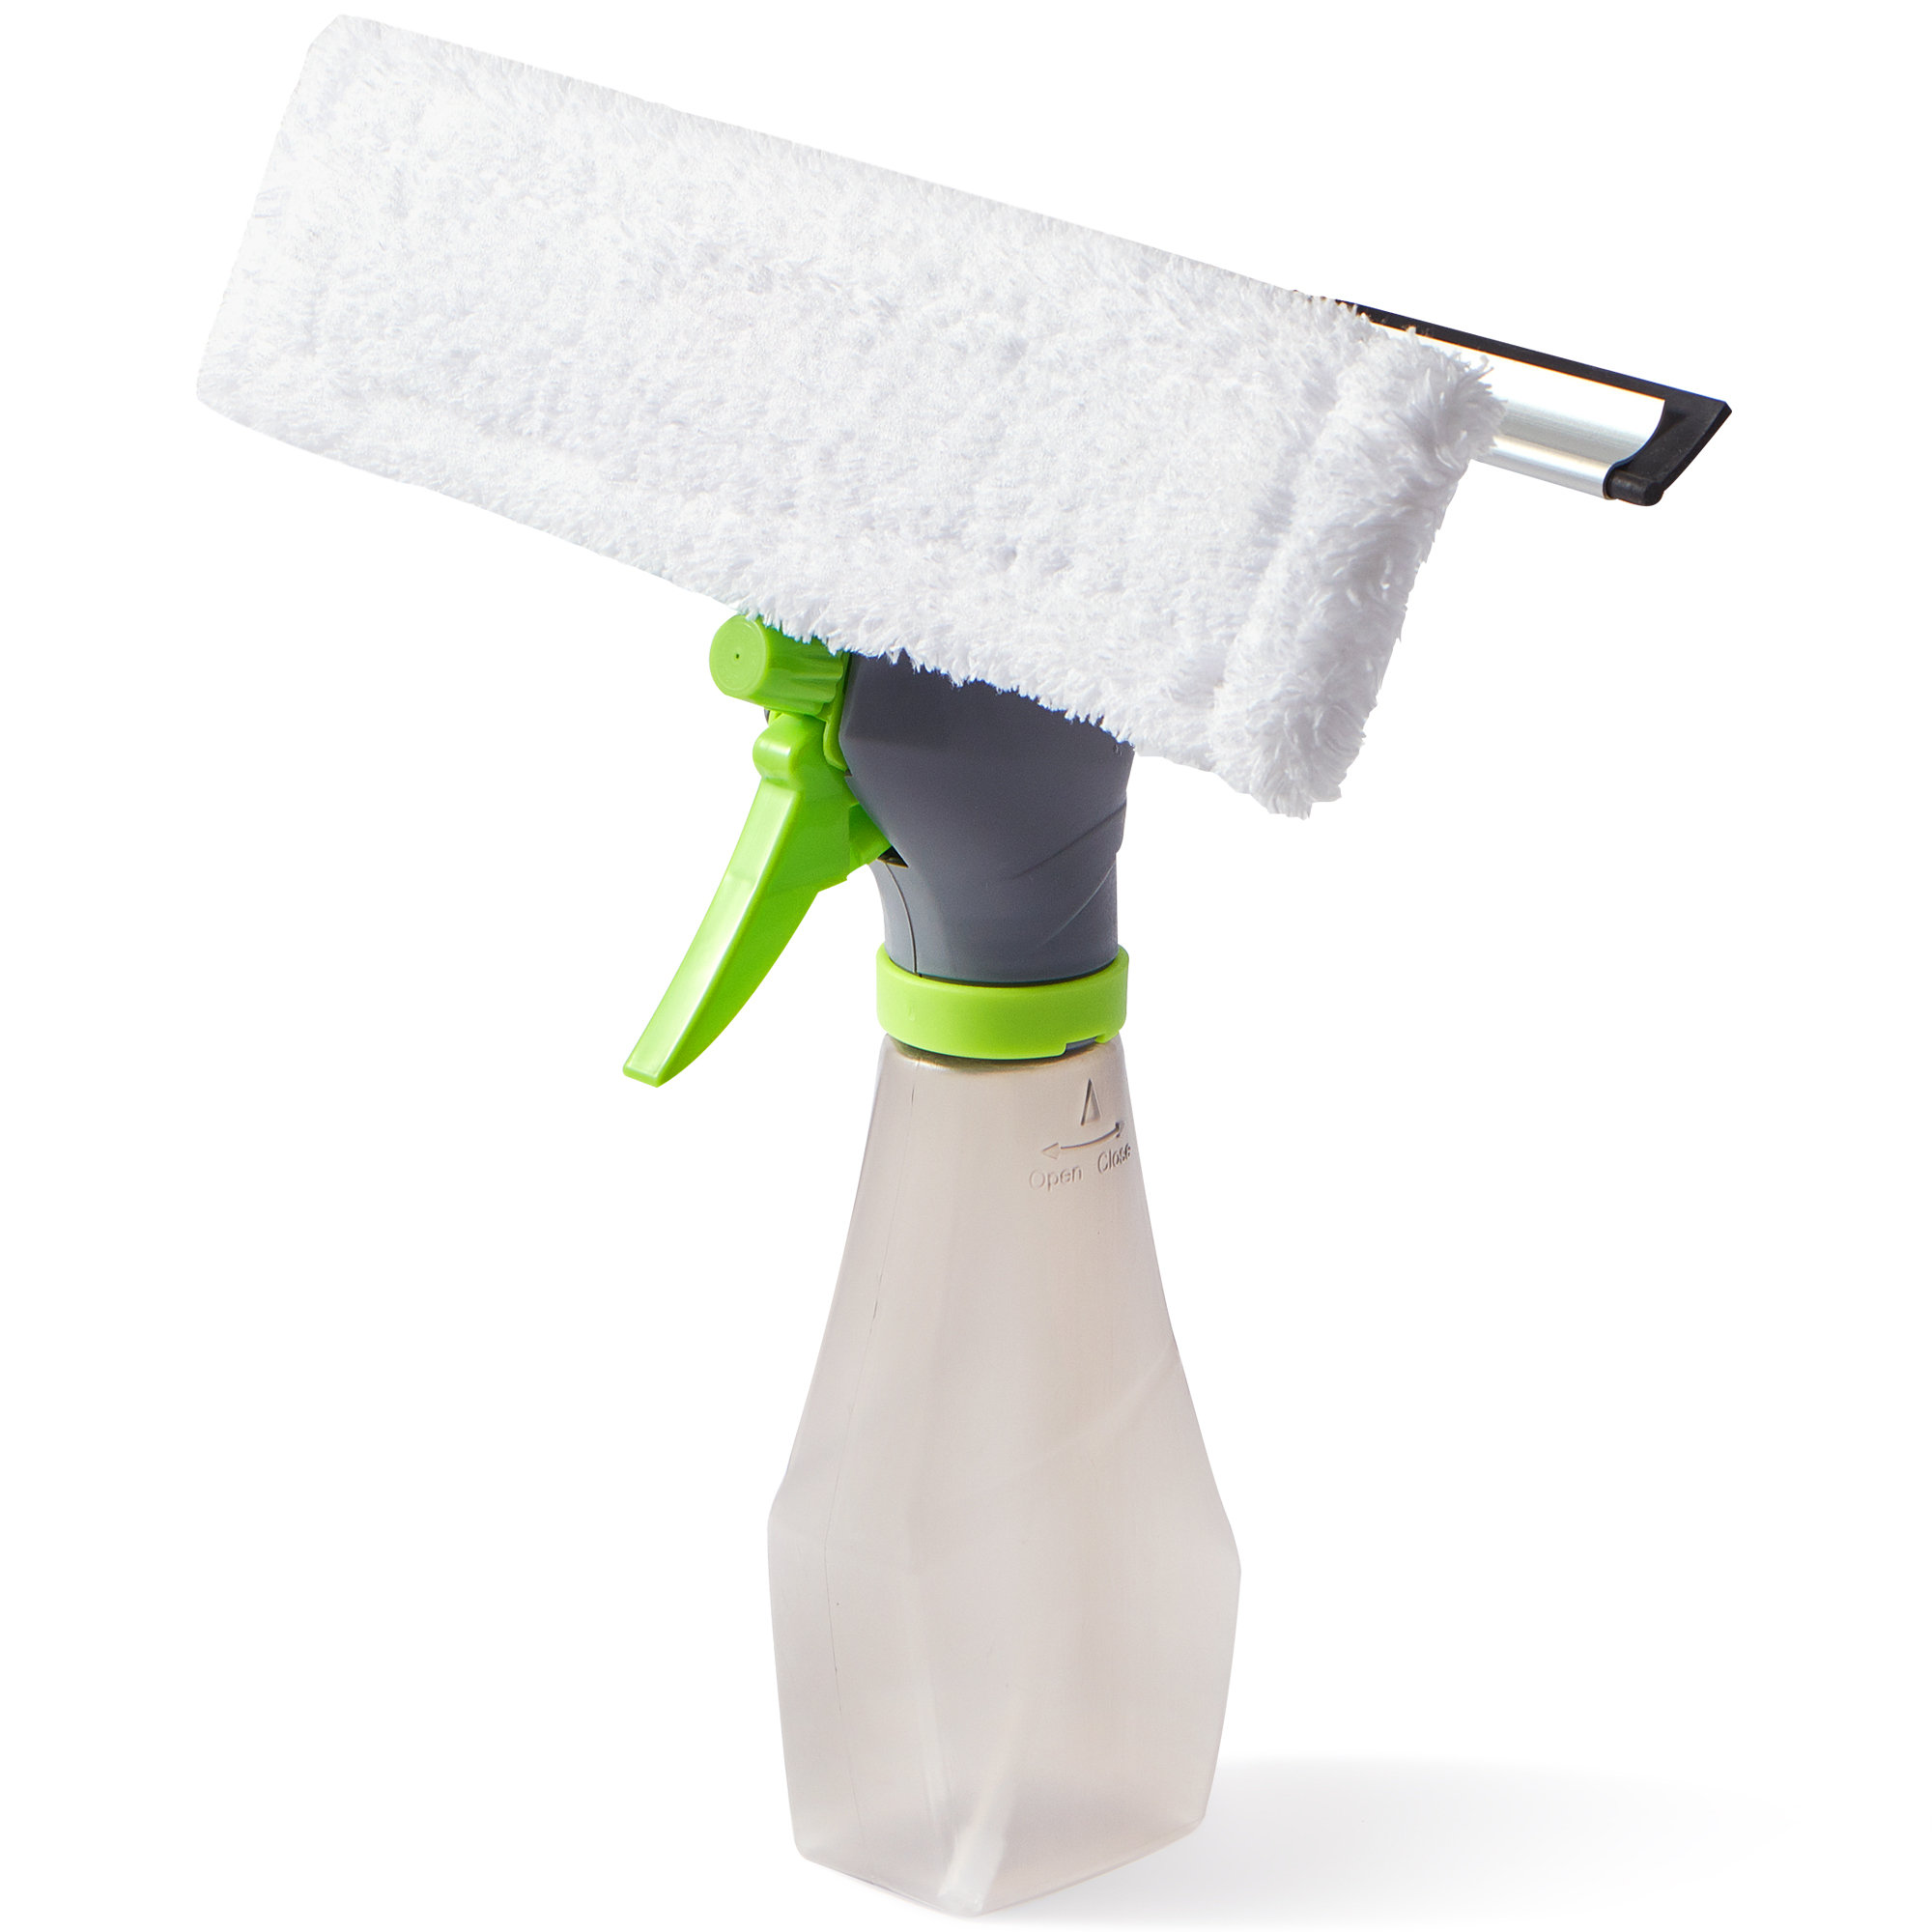 Father's Day Gift Shower Squeegee, Squeegee, Bathroom Mirror